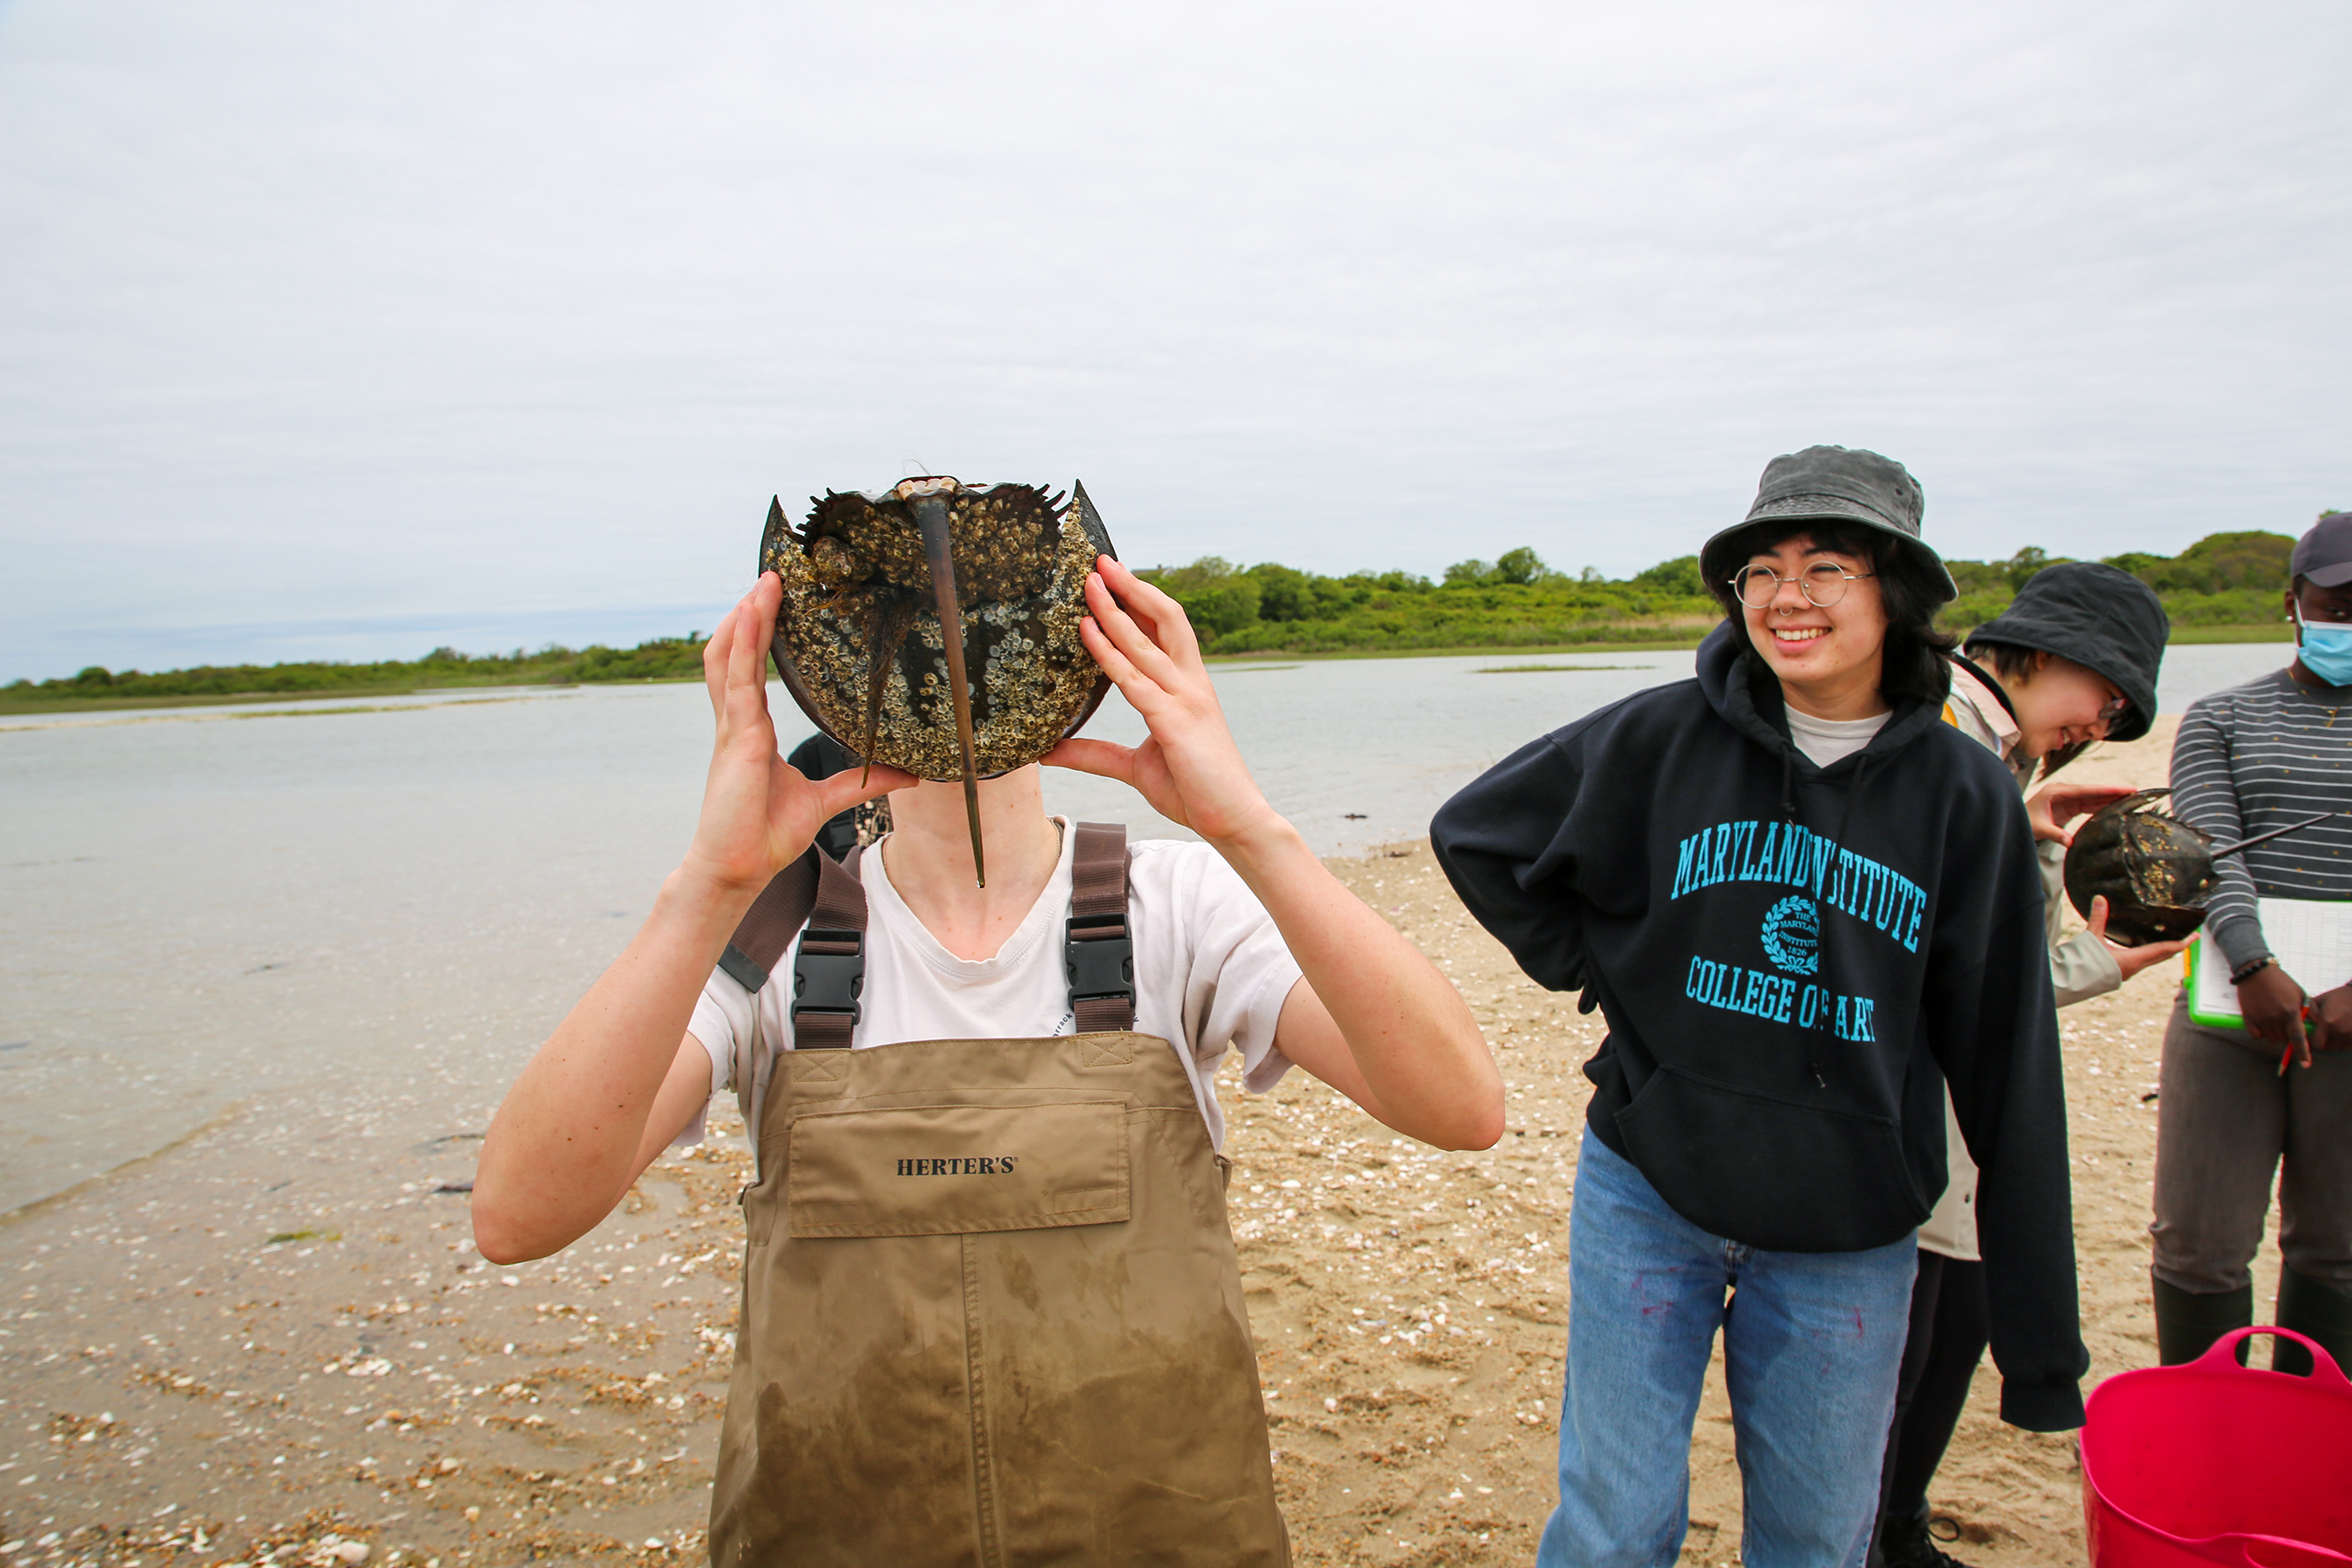 Student covers face with large horseshoe crab